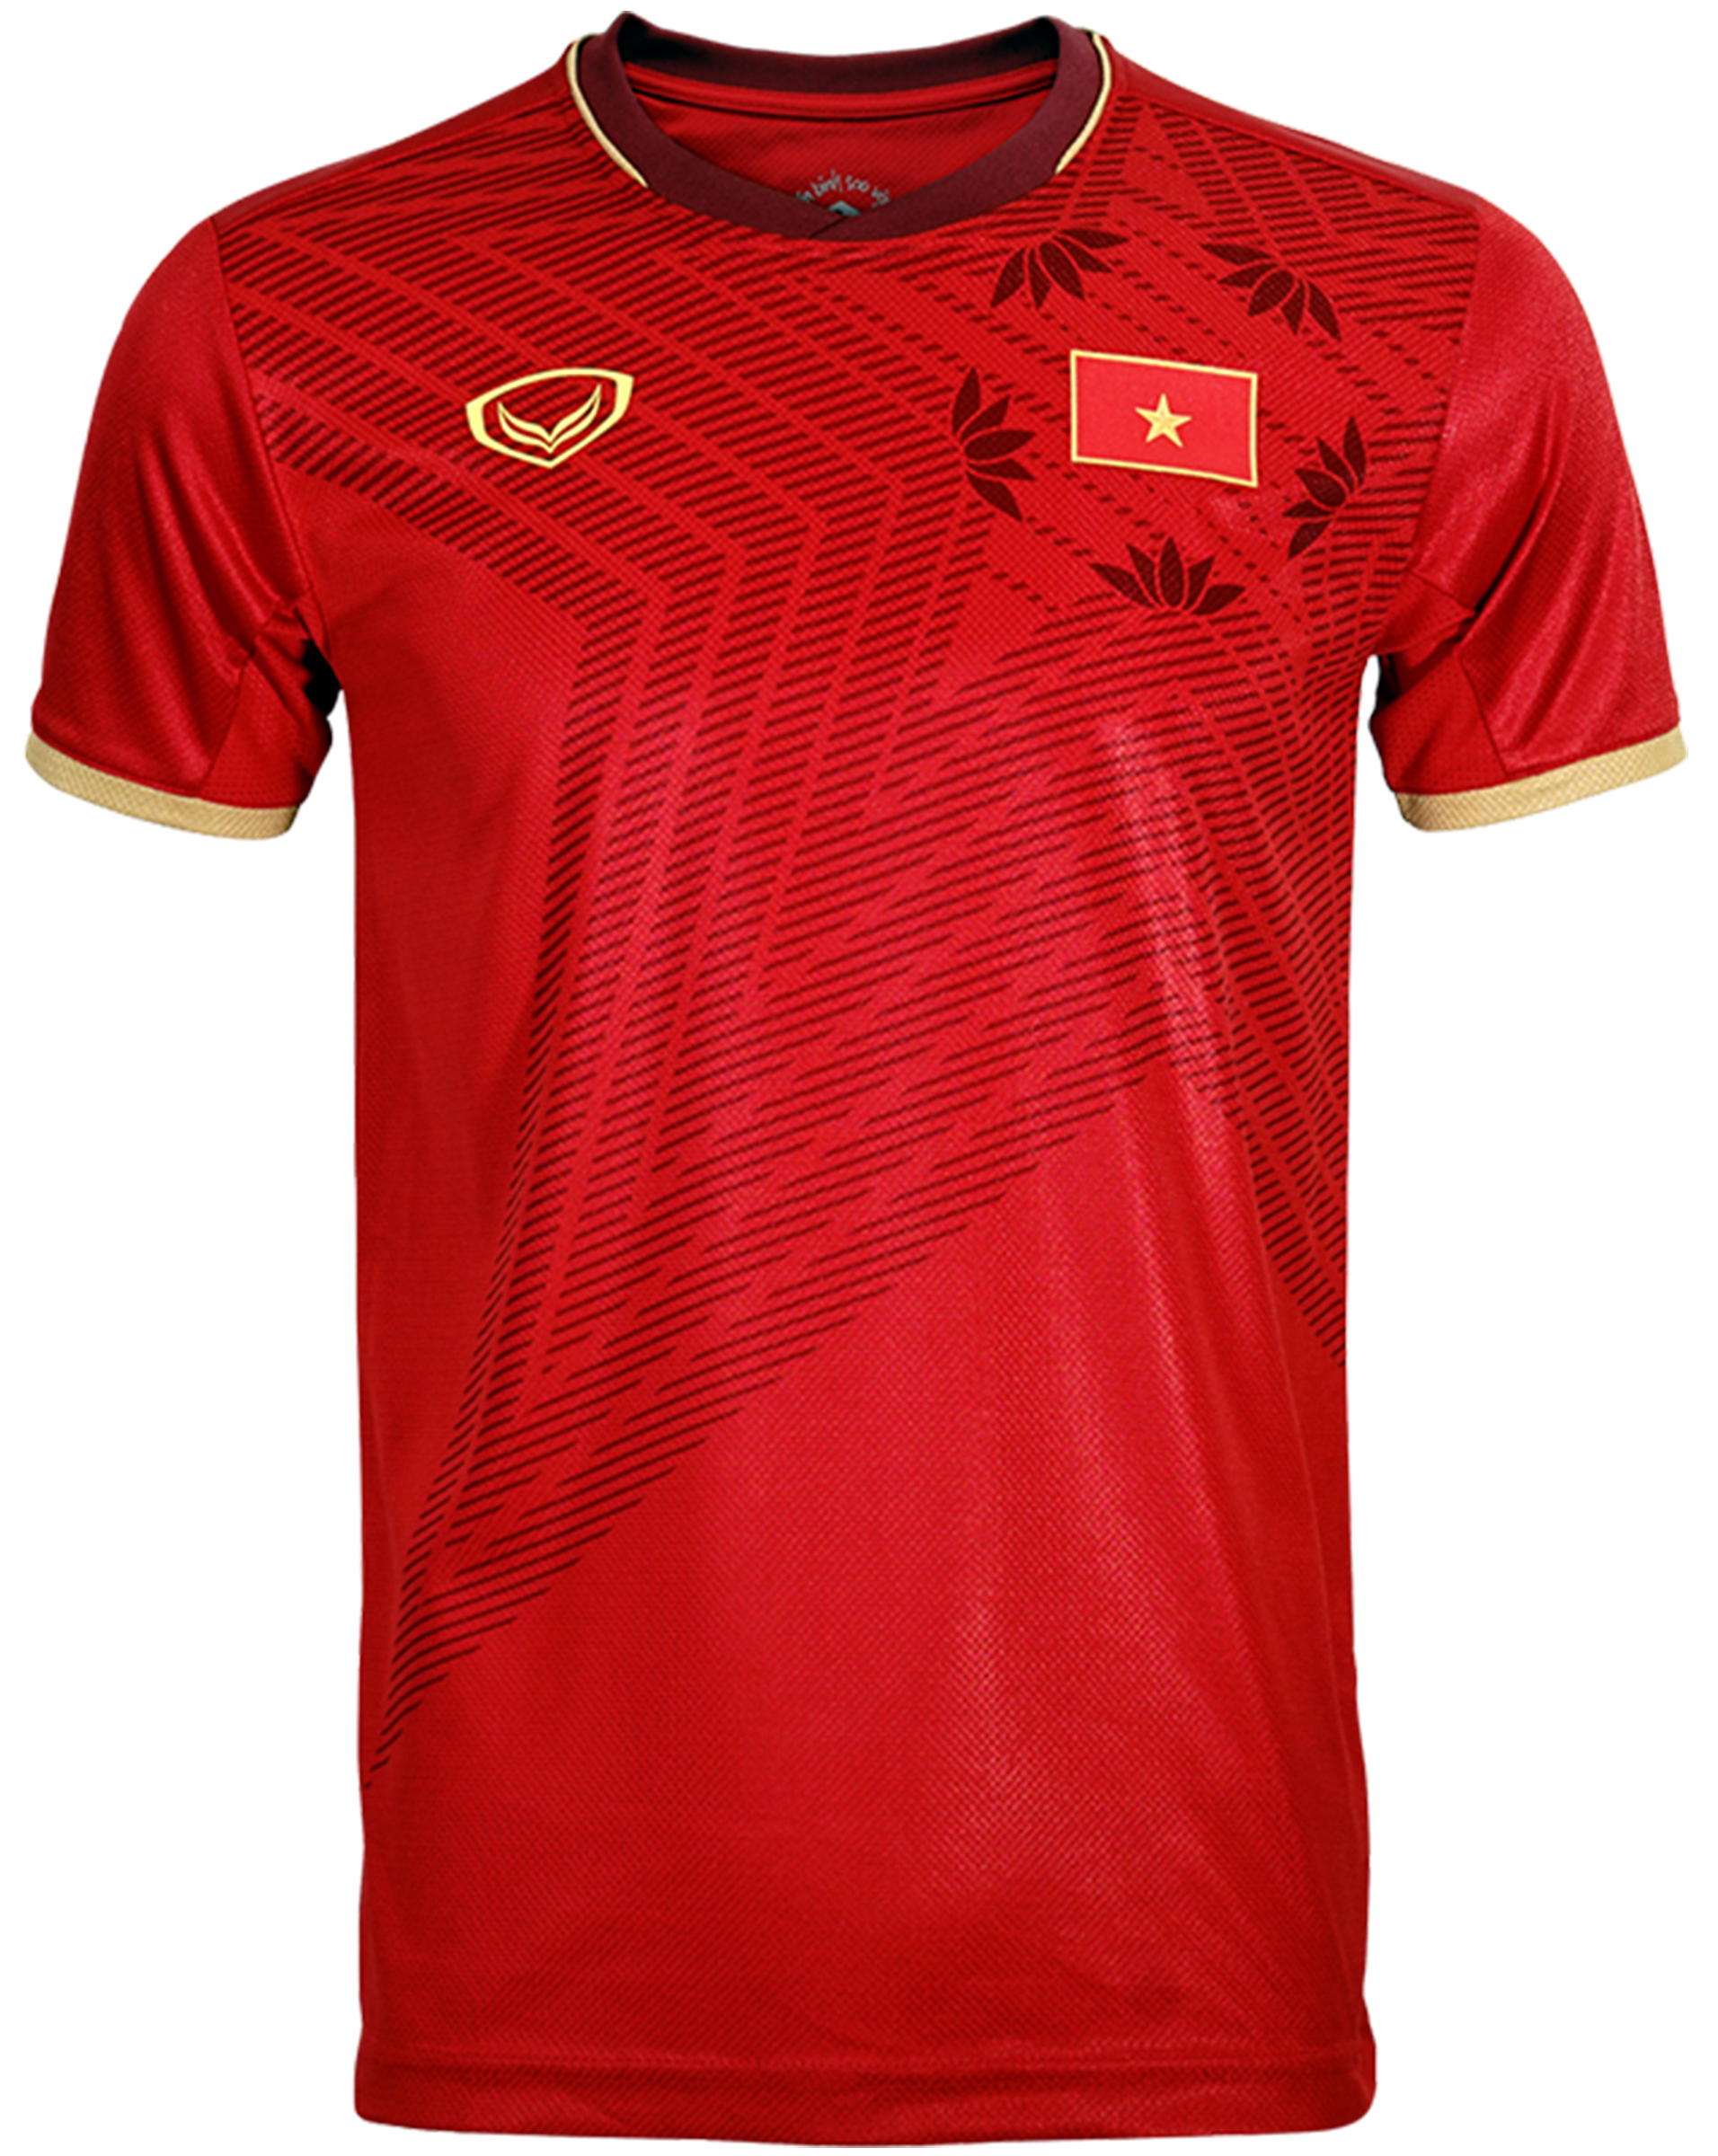 2020 Vietnam National Team Genuine Official Football Soccer Jersey Shirt Red Home Player Edition